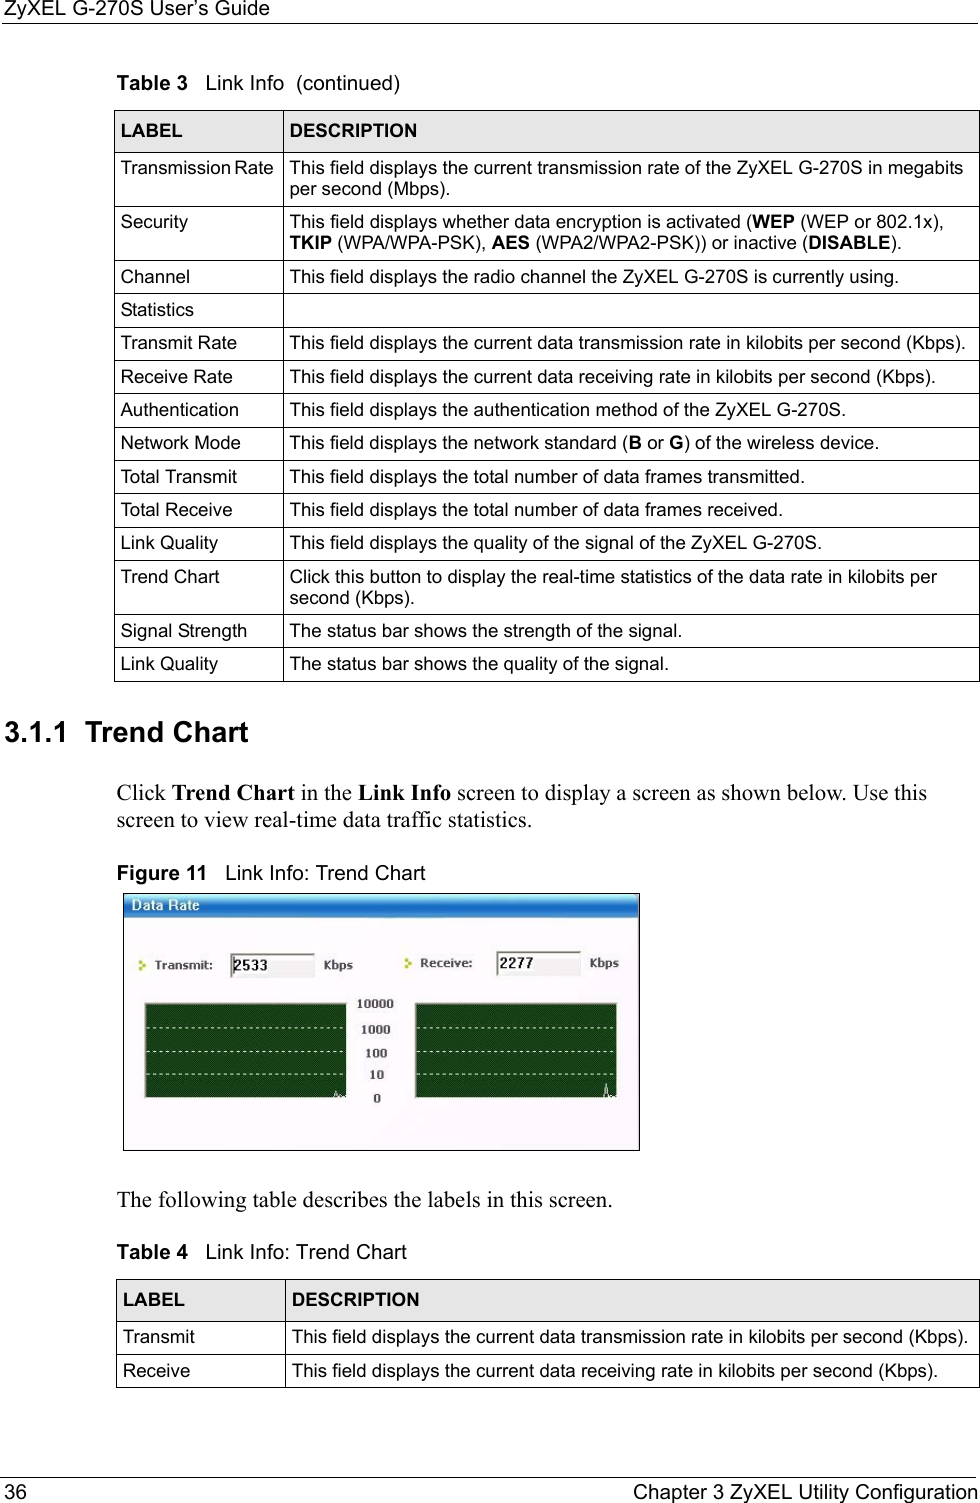 ZyXEL G-270S User’s Guide36 Chapter 3 ZyXEL Utility Configuration3.1.1  Trend Chart Click Trend Chart in the Link Info screen to display a screen as shown below. Use this screen to view real-time data traffic statistics.Figure 11   Link Info: Trend Chart The following table describes the labels in this screen. Transmission Rate  This field displays the current transmission rate of the ZyXEL G-270S in megabits per second (Mbps).Security  This field displays whether data encryption is activated (WEP (WEP or 802.1x), TKIP (WPA/WPA-PSK), AES (WPA2/WPA2-PSK)) or inactive (DISABLE).Channel This field displays the radio channel the ZyXEL G-270S is currently using.StatisticsTransmit Rate This field displays the current data transmission rate in kilobits per second (Kbps).Receive Rate  This field displays the current data receiving rate in kilobits per second (Kbps).Authentication  This field displays the authentication method of the ZyXEL G-270S.Network Mode  This field displays the network standard (B or G) of the wireless device. Total Transmit  This field displays the total number of data frames transmitted.Total Receive  This field displays the total number of data frames received.Link Quality This field displays the quality of the signal of the ZyXEL G-270S.Trend Chart  Click this button to display the real-time statistics of the data rate in kilobits per second (Kbps).Signal Strength  The status bar shows the strength of the signal.Link Quality  The status bar shows the quality of the signal.Table 3   Link Info  (continued)LABEL DESCRIPTIONTable 4   Link Info: Trend Chart LABEL DESCRIPTIONTransmit This field displays the current data transmission rate in kilobits per second (Kbps).Receive This field displays the current data receiving rate in kilobits per second (Kbps).